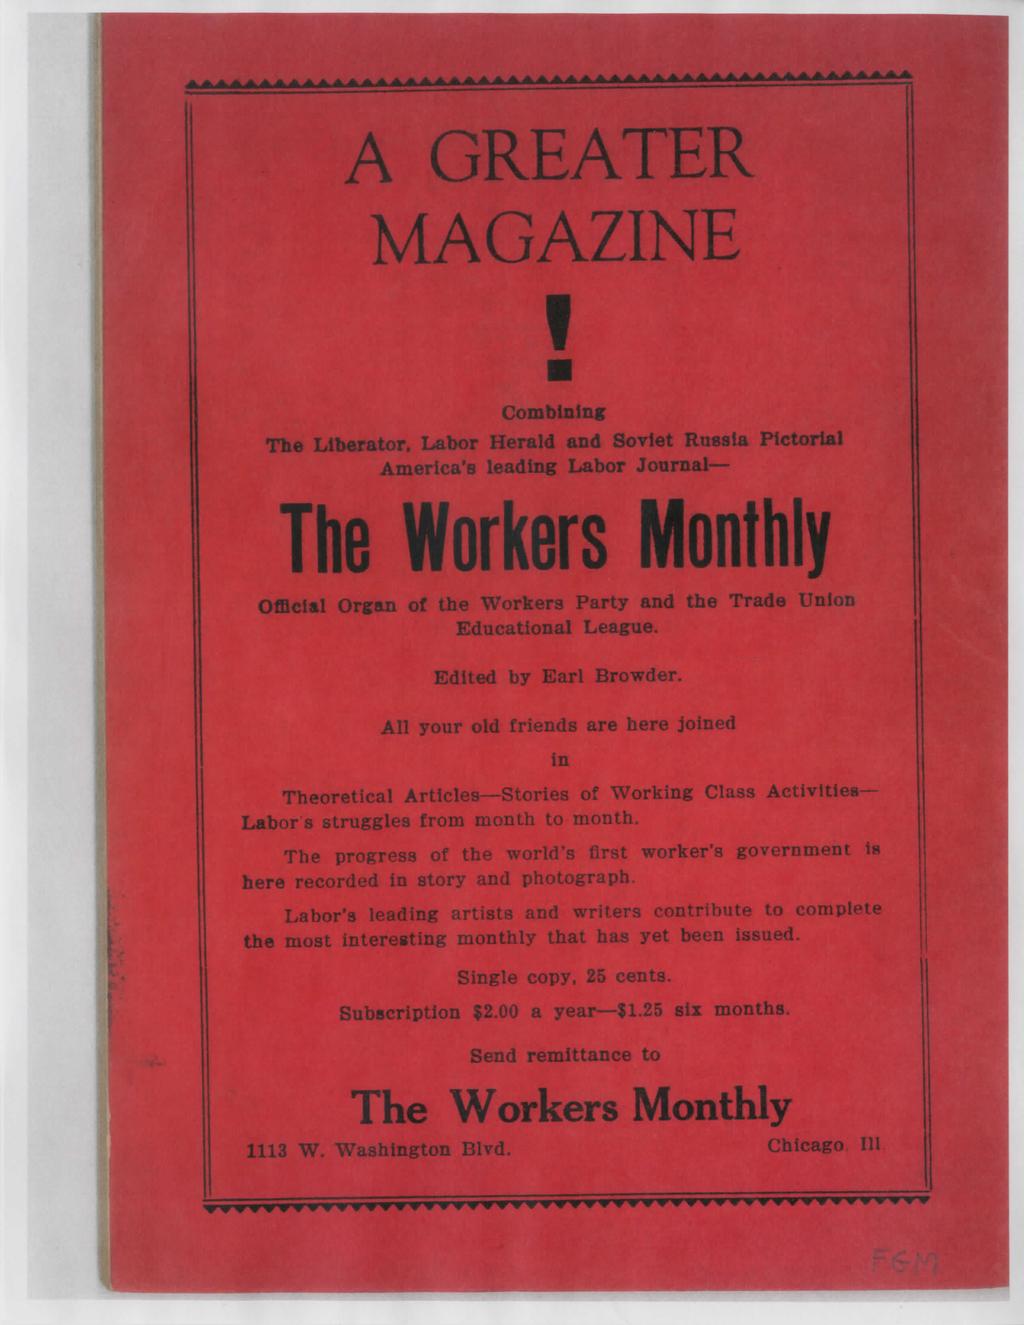 A GREATER MAGAZINE f Combining The Liberator, Labor Herald and Soviet Russia Pictorial America's leading Labor Journal The Workers Monthly Official Organ of the Workers Party and the Trade Union